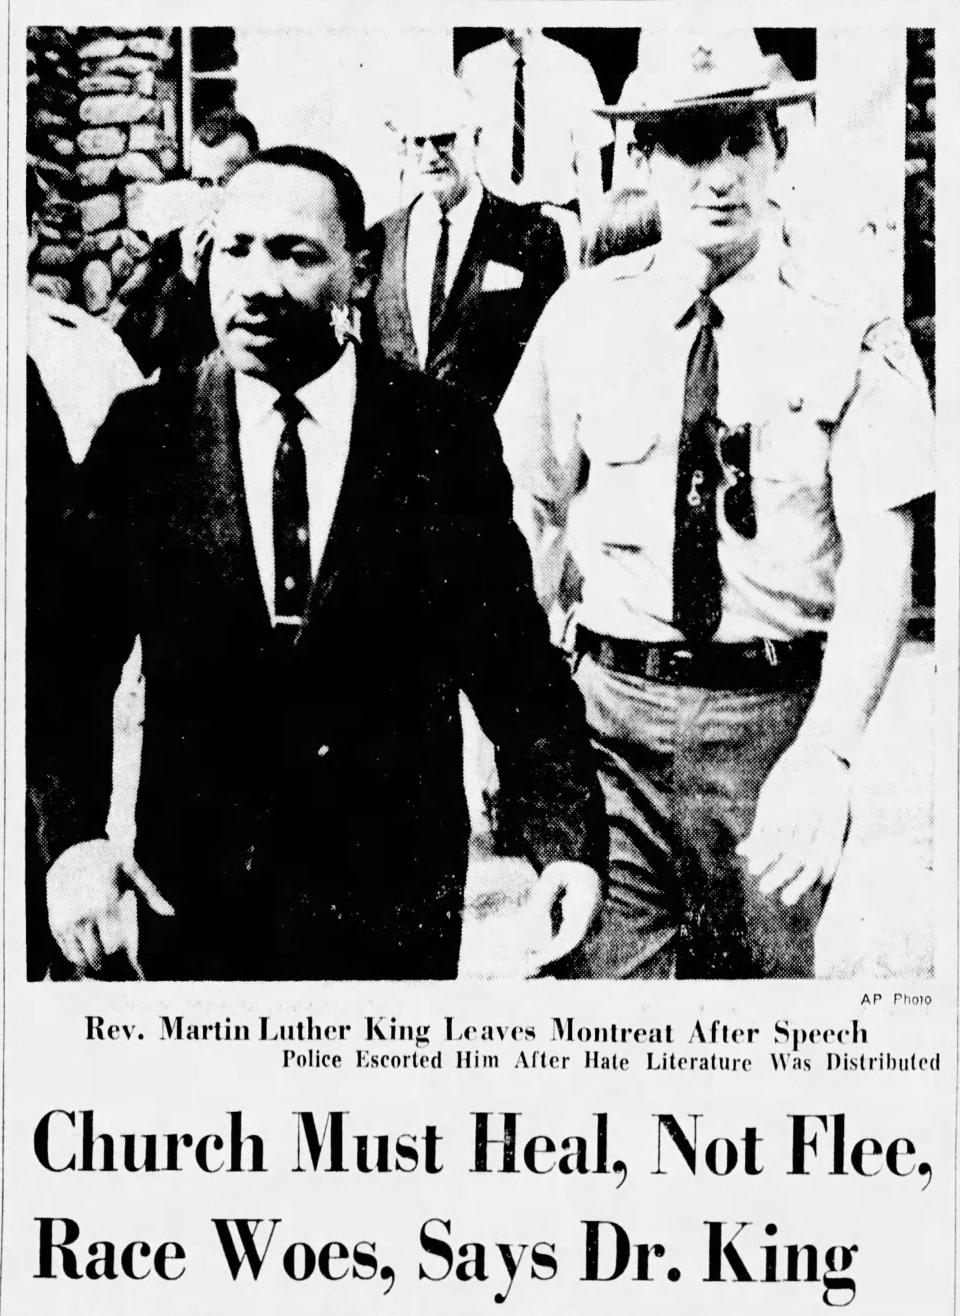 A story about Martin Luther King Jr.'s visit to Montreat appeared on the front page of the Aug. 22, 1965, edition of The Charlotte Observer.